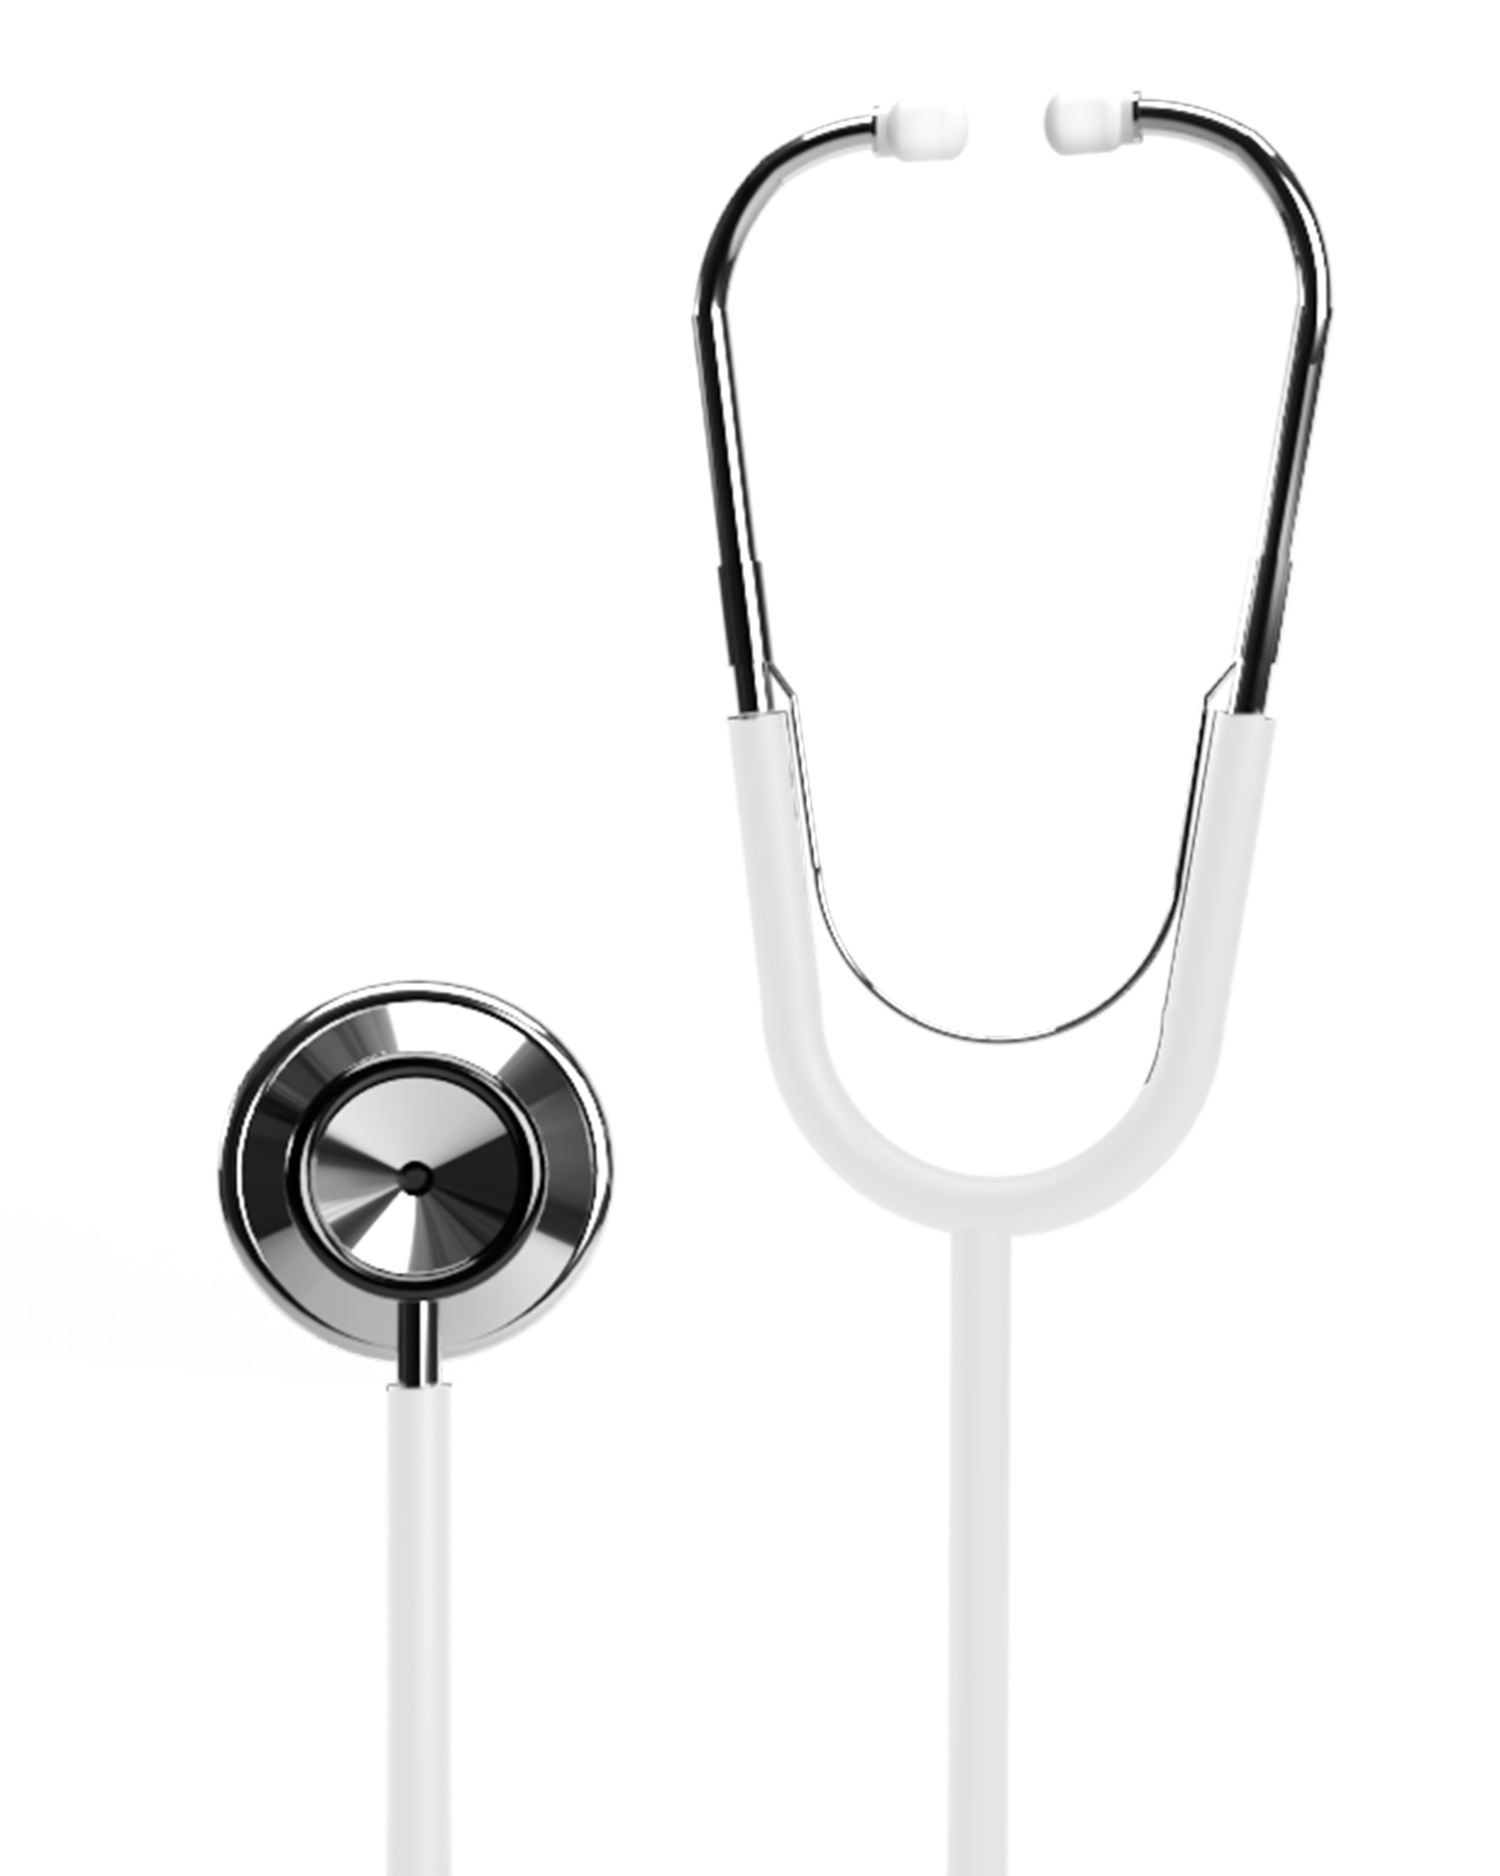 BV Medical Professional Series Dual-Head Stethoscope Limited Collection White